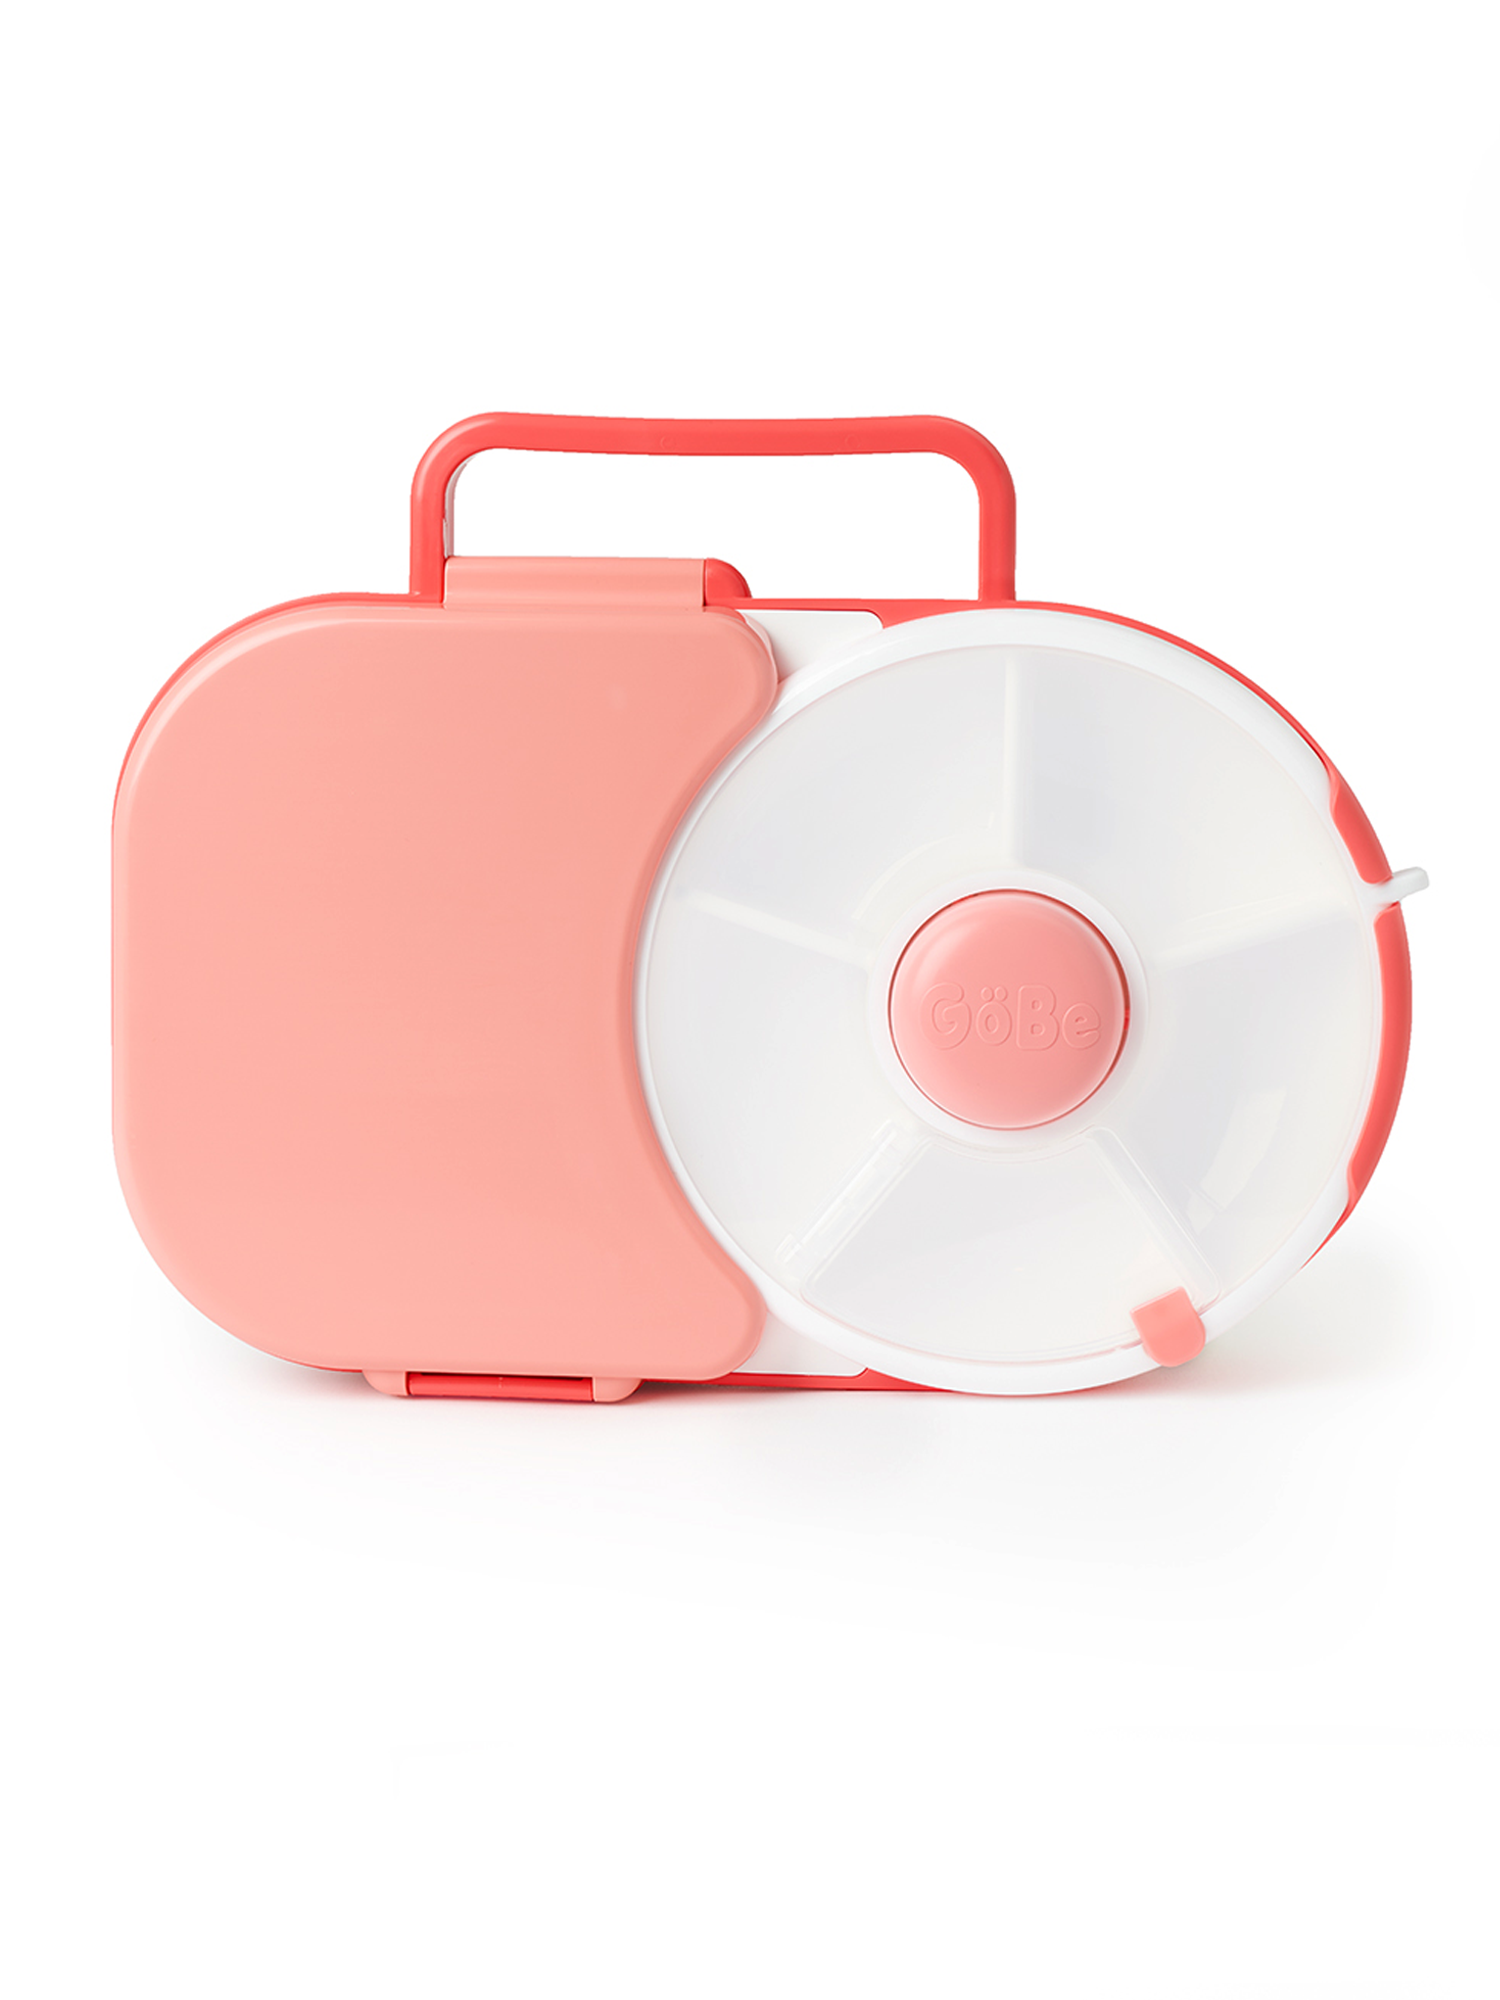 Gobe large snack and meal spinner lunch box - Watermelon Pink